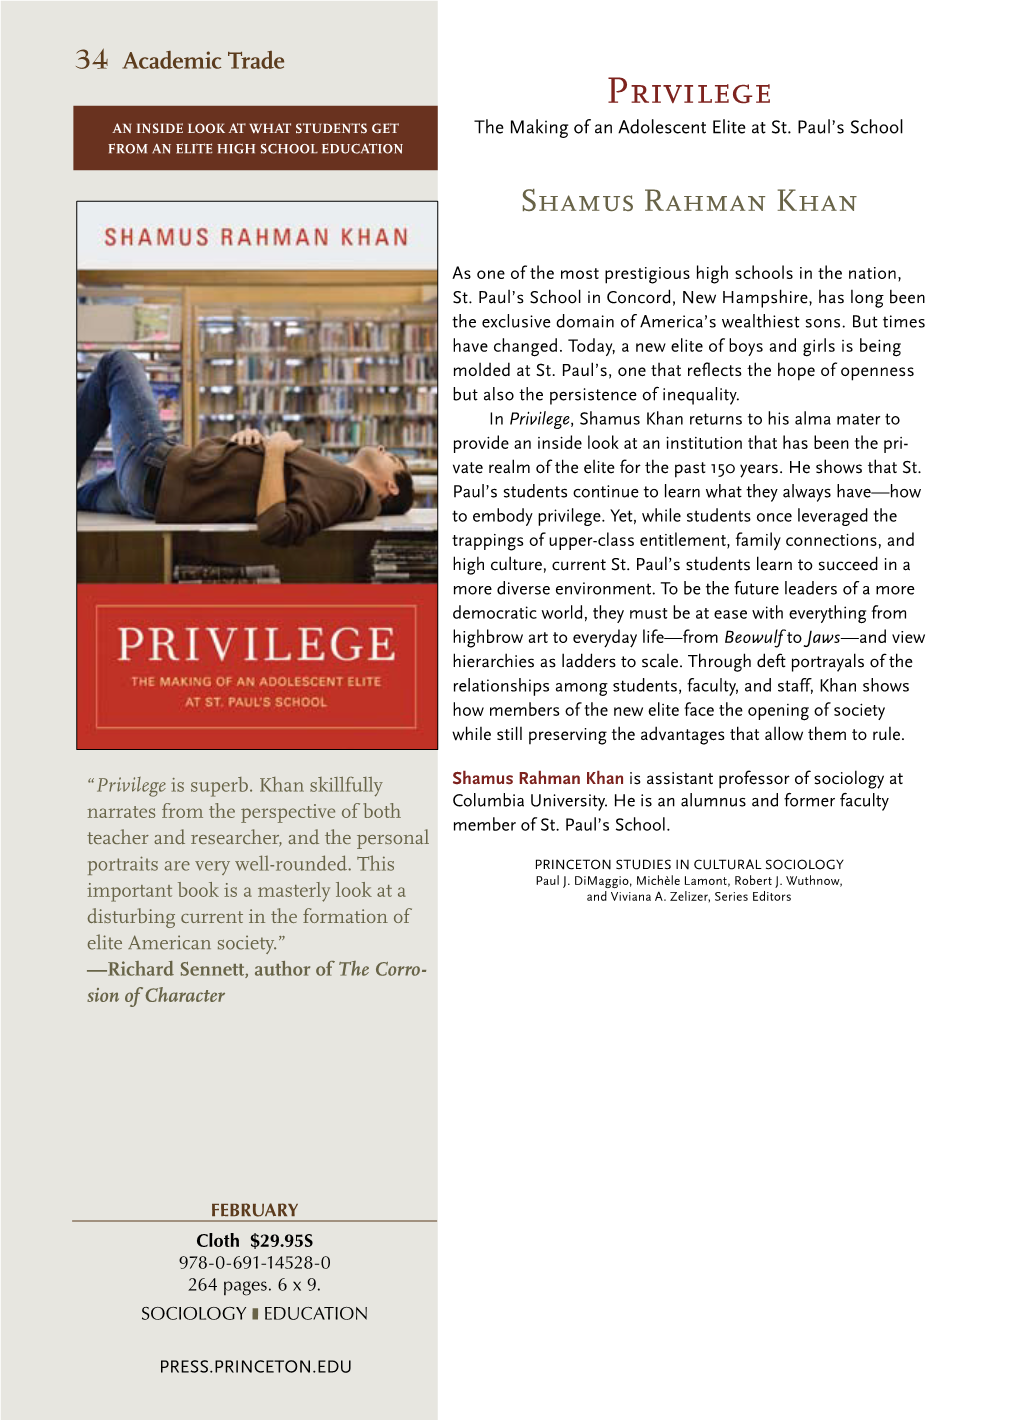 Privilege an INSIDE LOOK at WHAT STUDENTS GET the Making of an Adolescent Elite at St